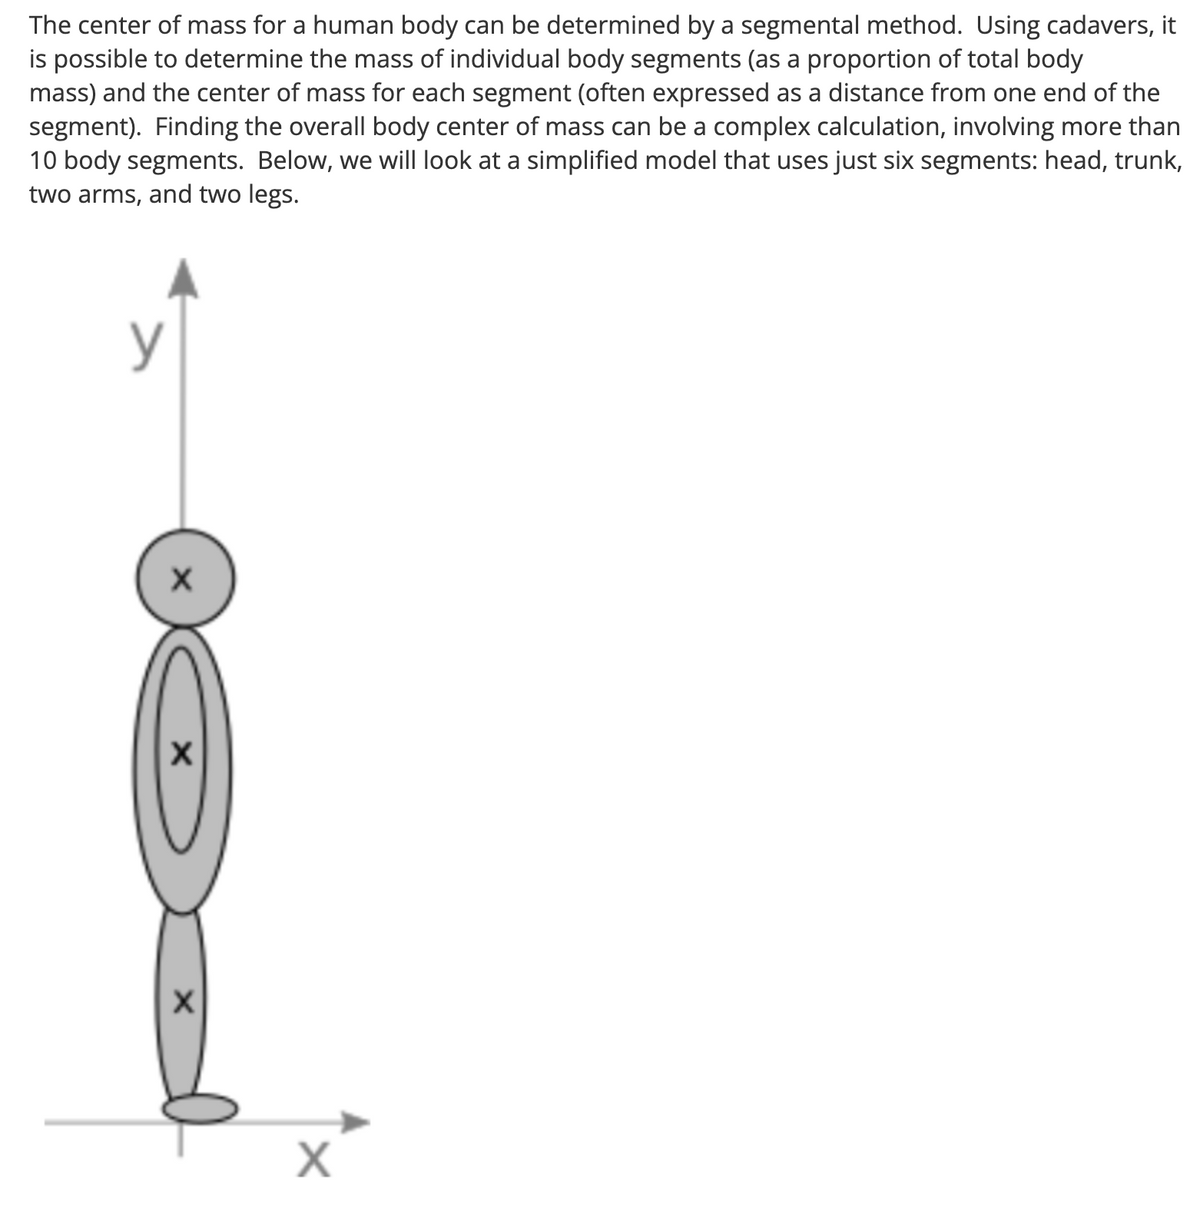 The center of mass for a human body can be determined by a segmental method. Using cadavers, it
is possible to determine the mass of individual body segments (as a proportion of total body
mass) and the center of mass for each segment (often expressed as a distance from one end of the
segment). Finding the overall body center of mass can be a complex calculation, involving more than
10 body segments. Below, we will look at a simplified model that uses just six segments: head, trunk,
two arms, and two legs.
y
X
X
X